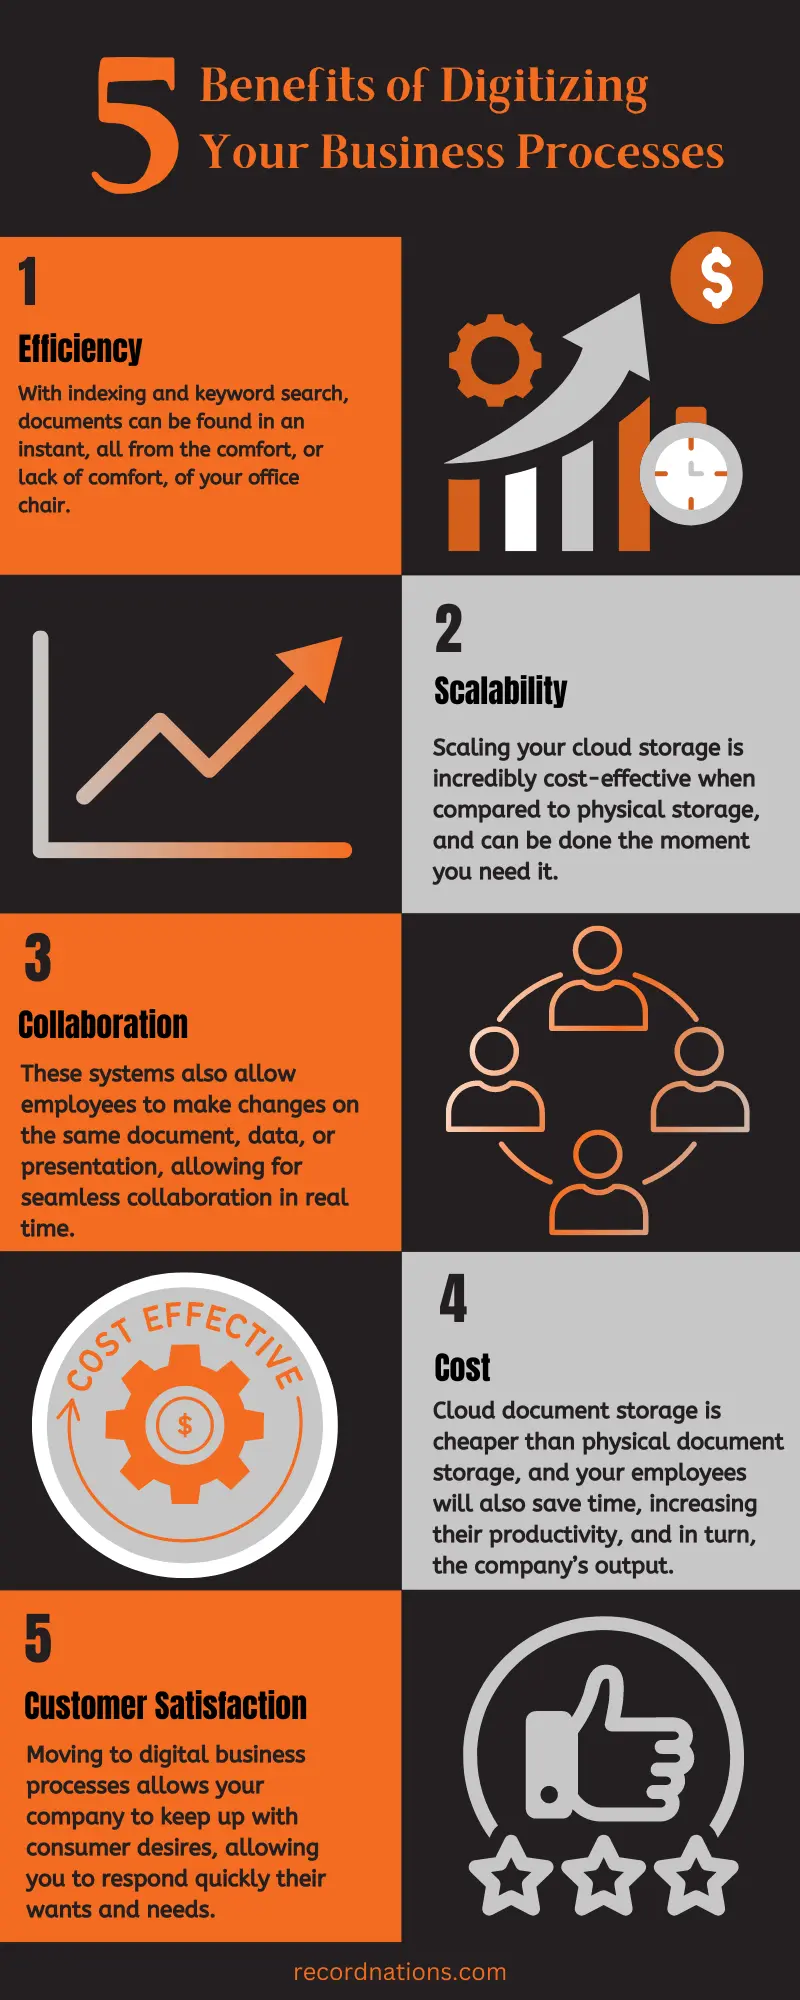 benefits of document scanning and cloud storage